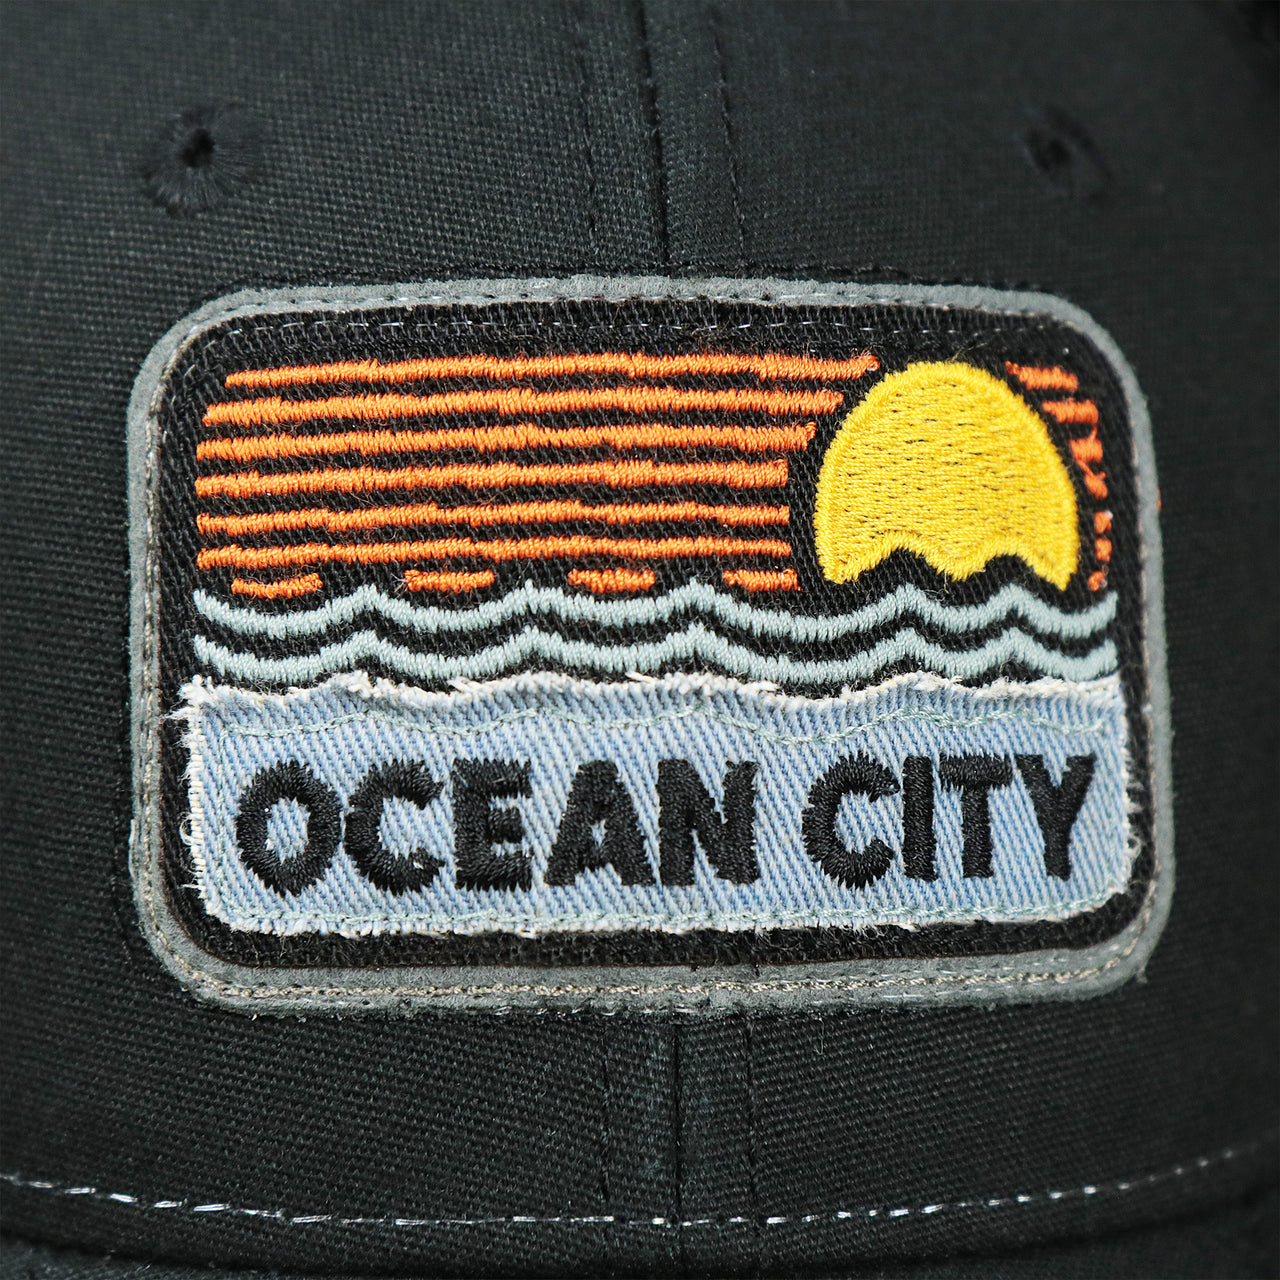 The Ocean City Sunset Patch on the Youth New Jersey Ocean City Sunset Mesh Back Trucker Hat | Black And Black Mesh Youth Trucker Hat